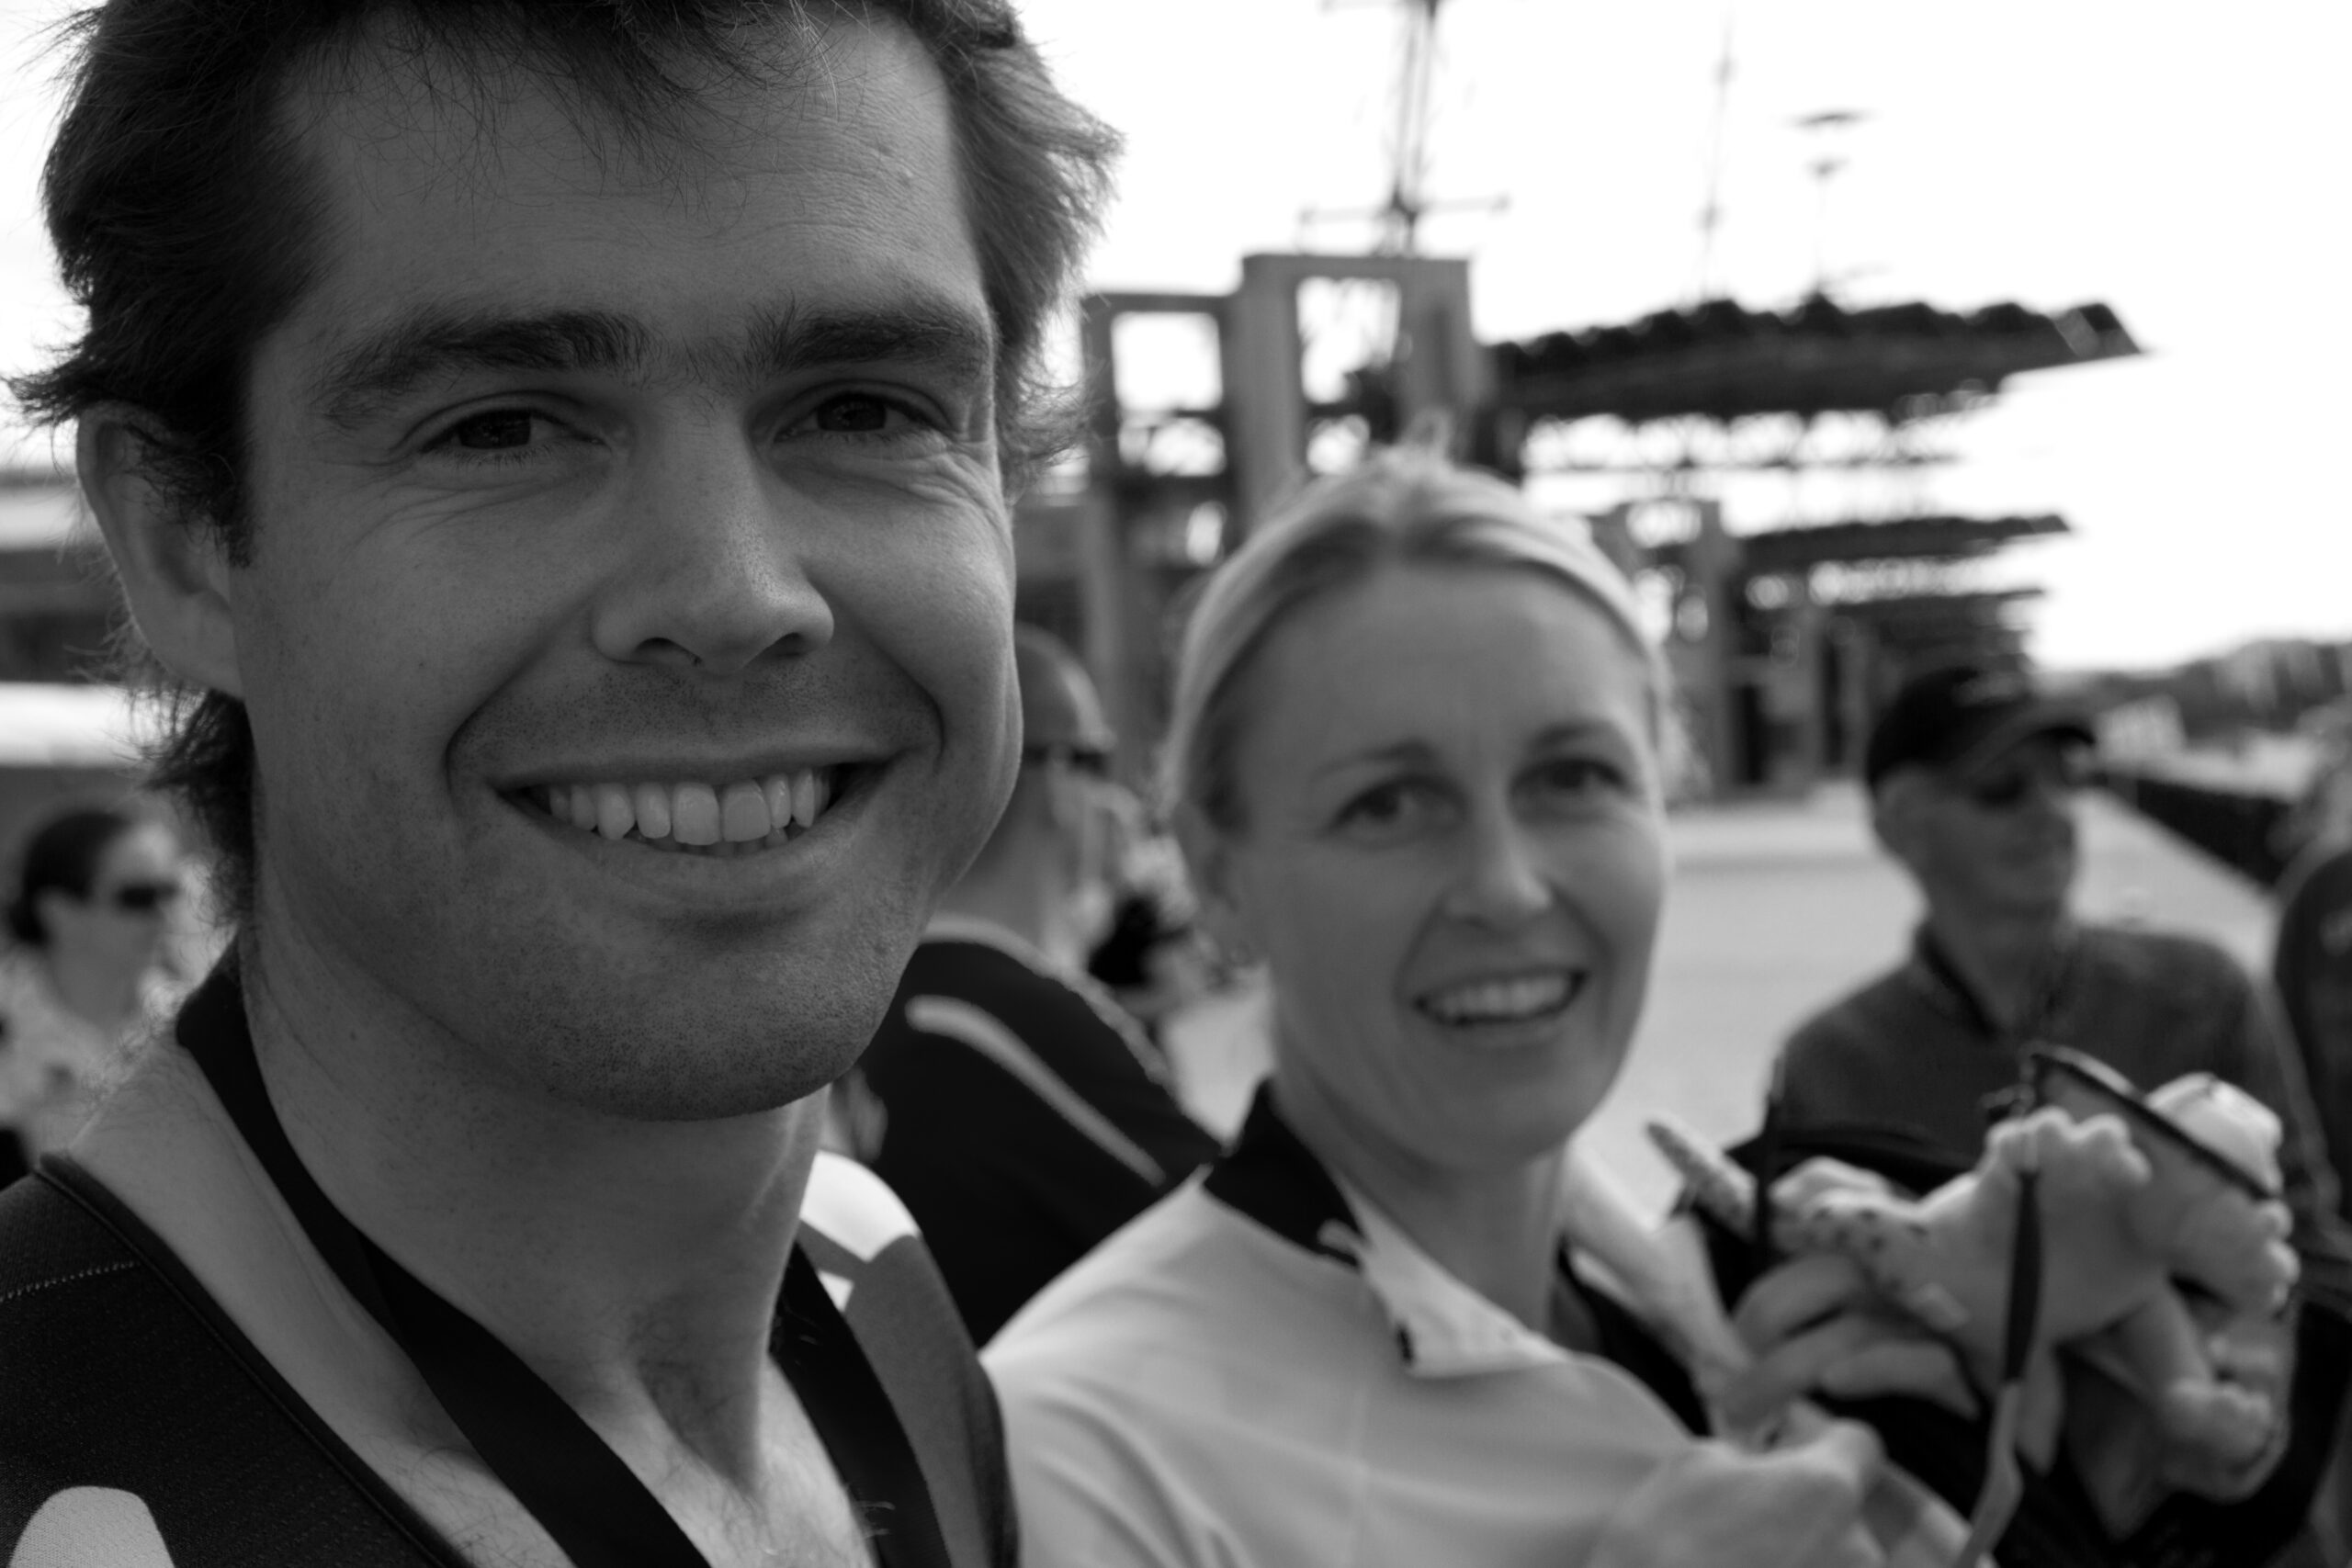 Dark haired man and blond woman smiling in black and white photo